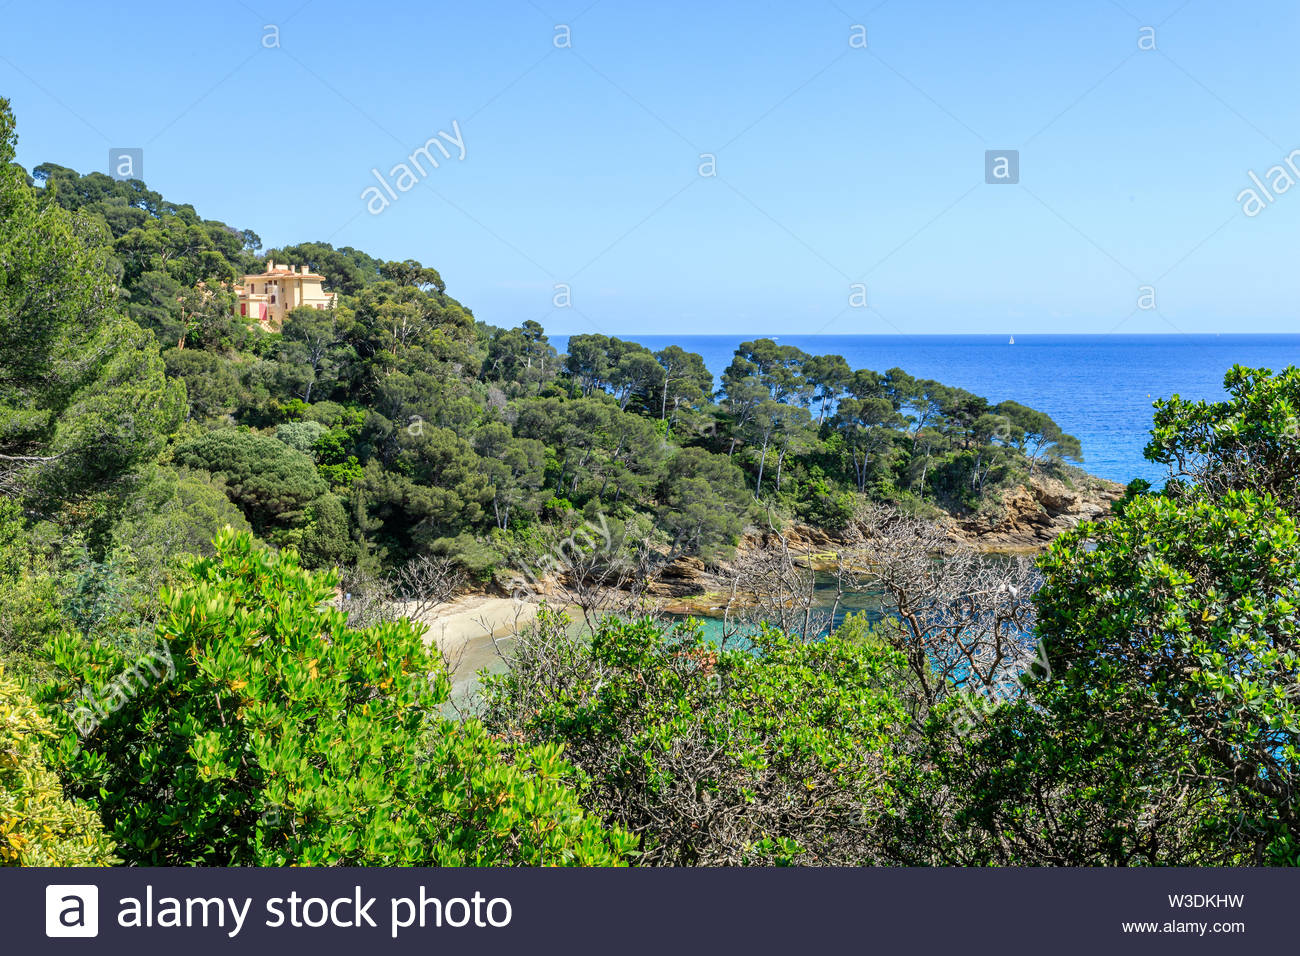 france var rayol canadel sur mer the domaine du rayol mediterranean garden property of the conservatoire du littoral villa rayolet and the point W3DKHW